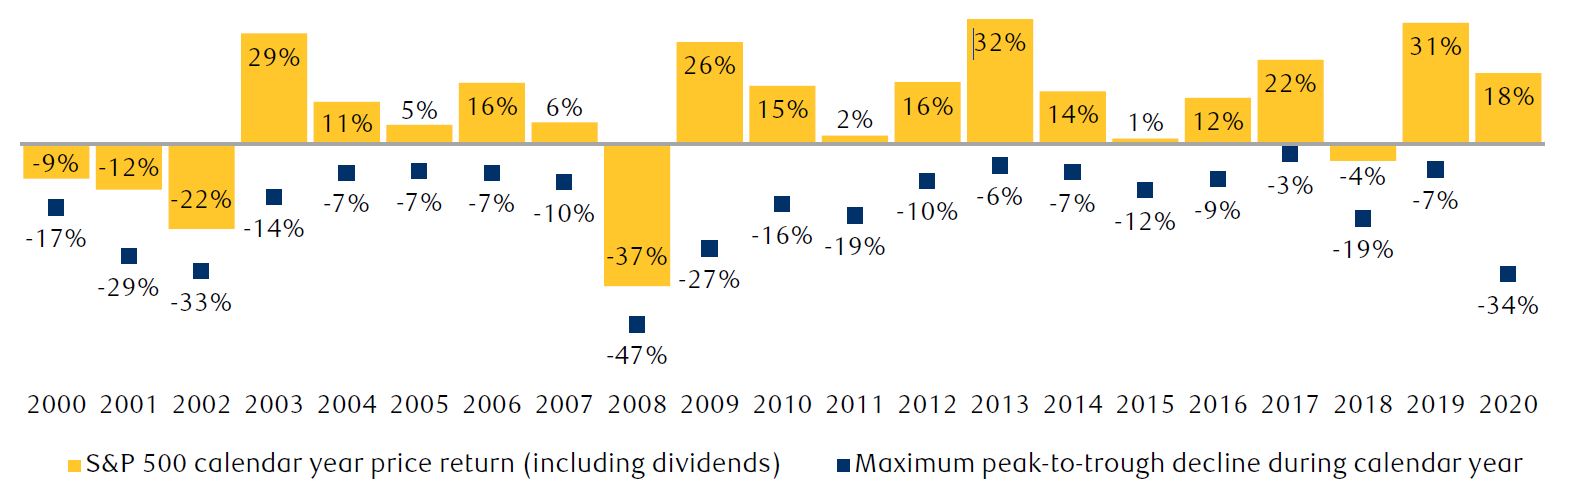 The bar chart shows annual performance of the S&P 500 including dividends from 2000 to 2020. For each year, the maximum peak to trough declines are also shown. This illustrates that even when the market performs well for the full year, meaningful pullbacks and corrections can occur. For example, in 2003, the S&P 500 rose 29%, but the market pulled back 14% at some point during the year. In 2009, the market finished the year up 26%, but at one point it had been down 27%. In 2020, the S&P 500 rose 18%, but at one point during the height of the COVID-19 crisis the market was down 34%.